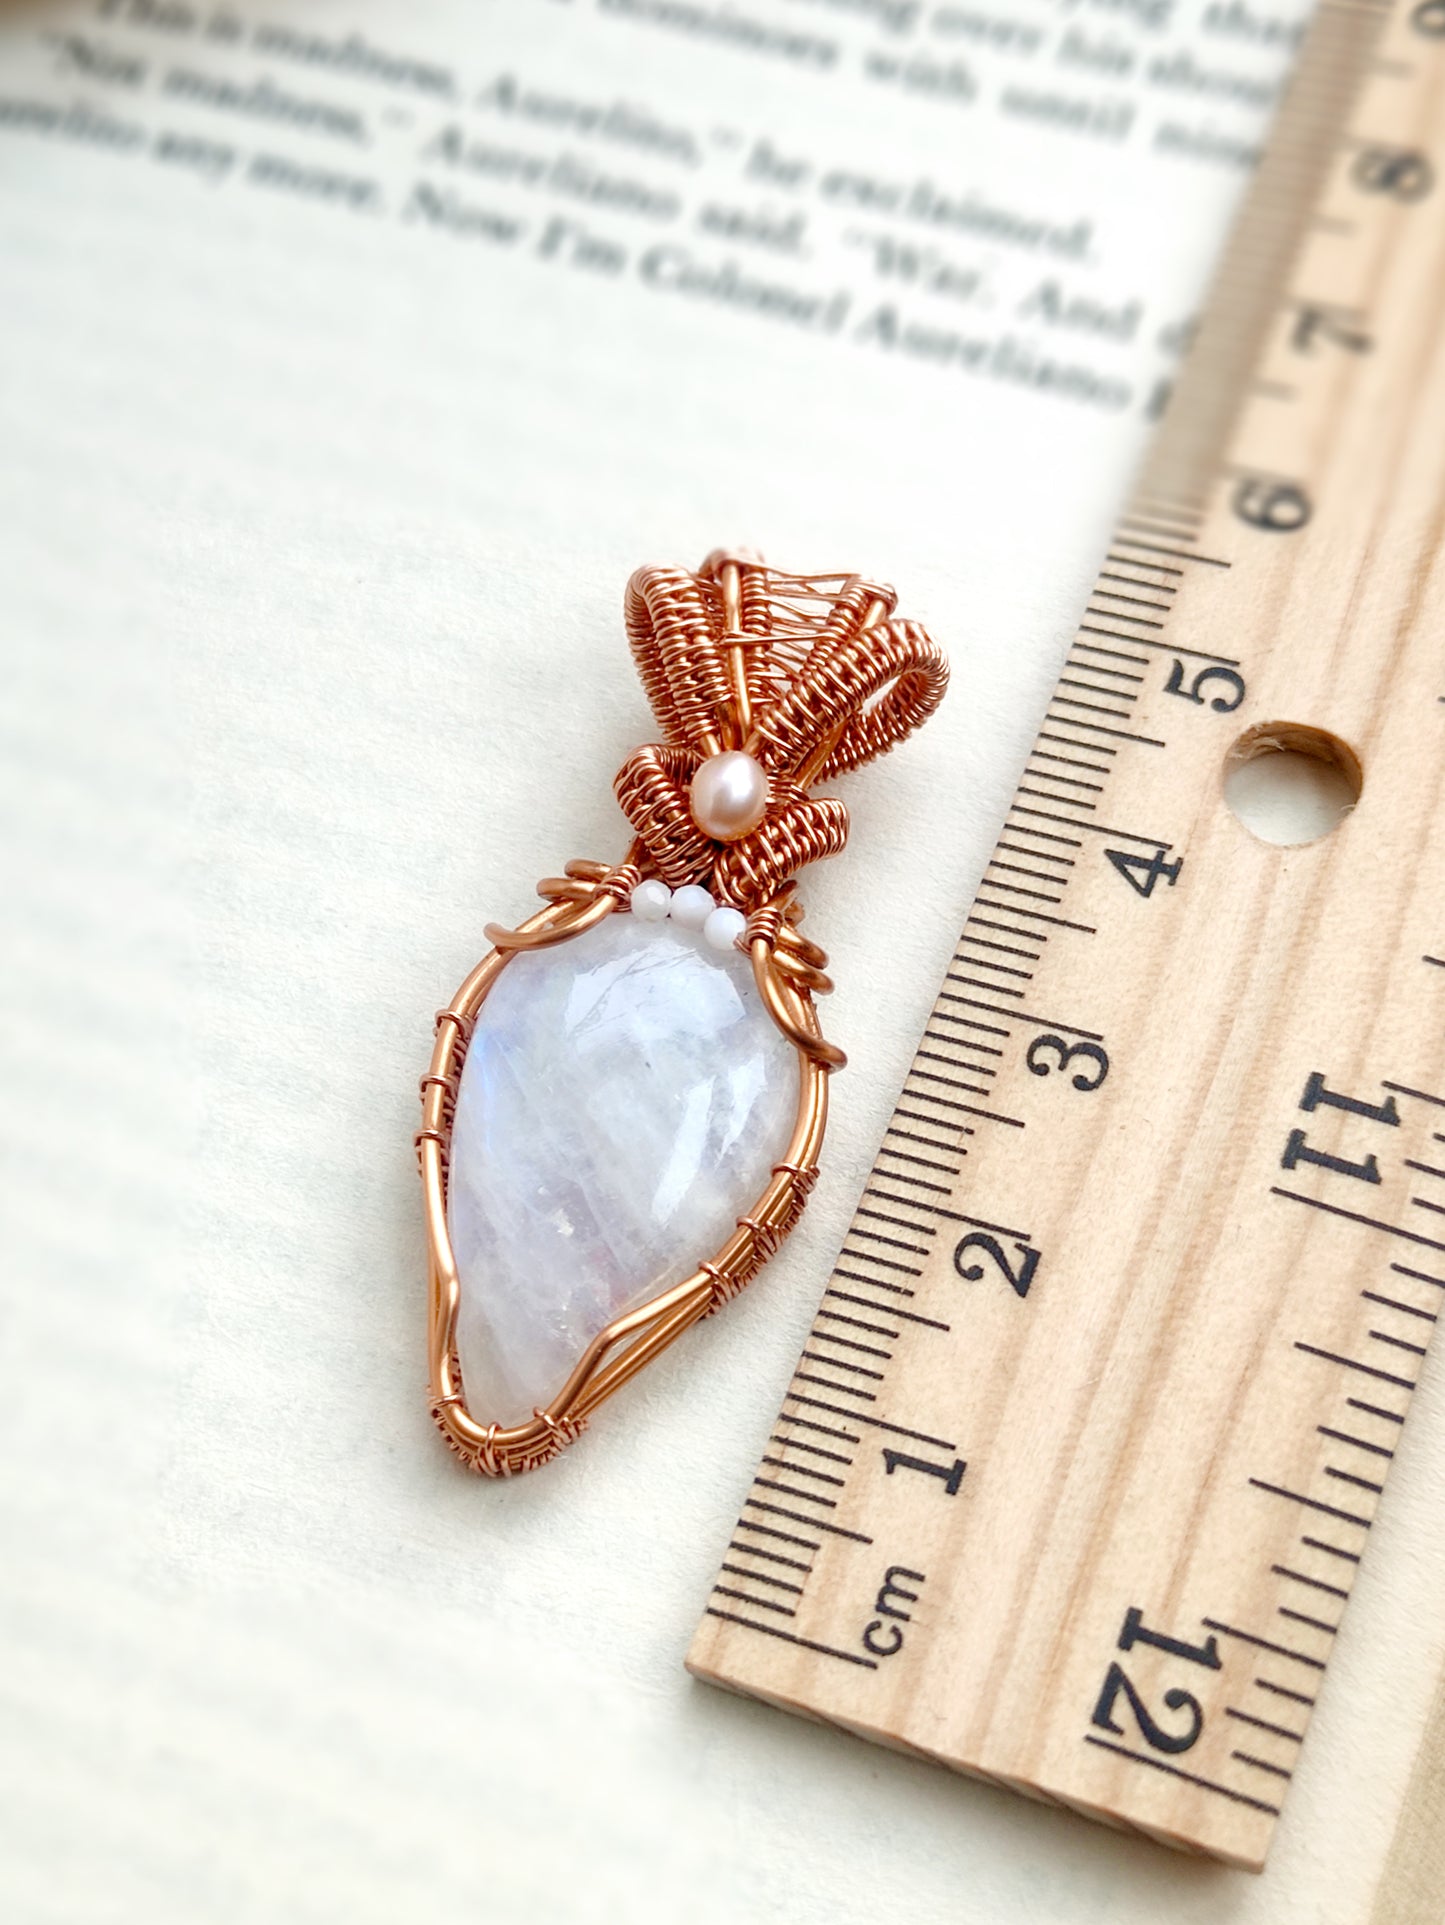 Teardrop Moonstone and Pearl Wire Weave Pendant in Solid Copper